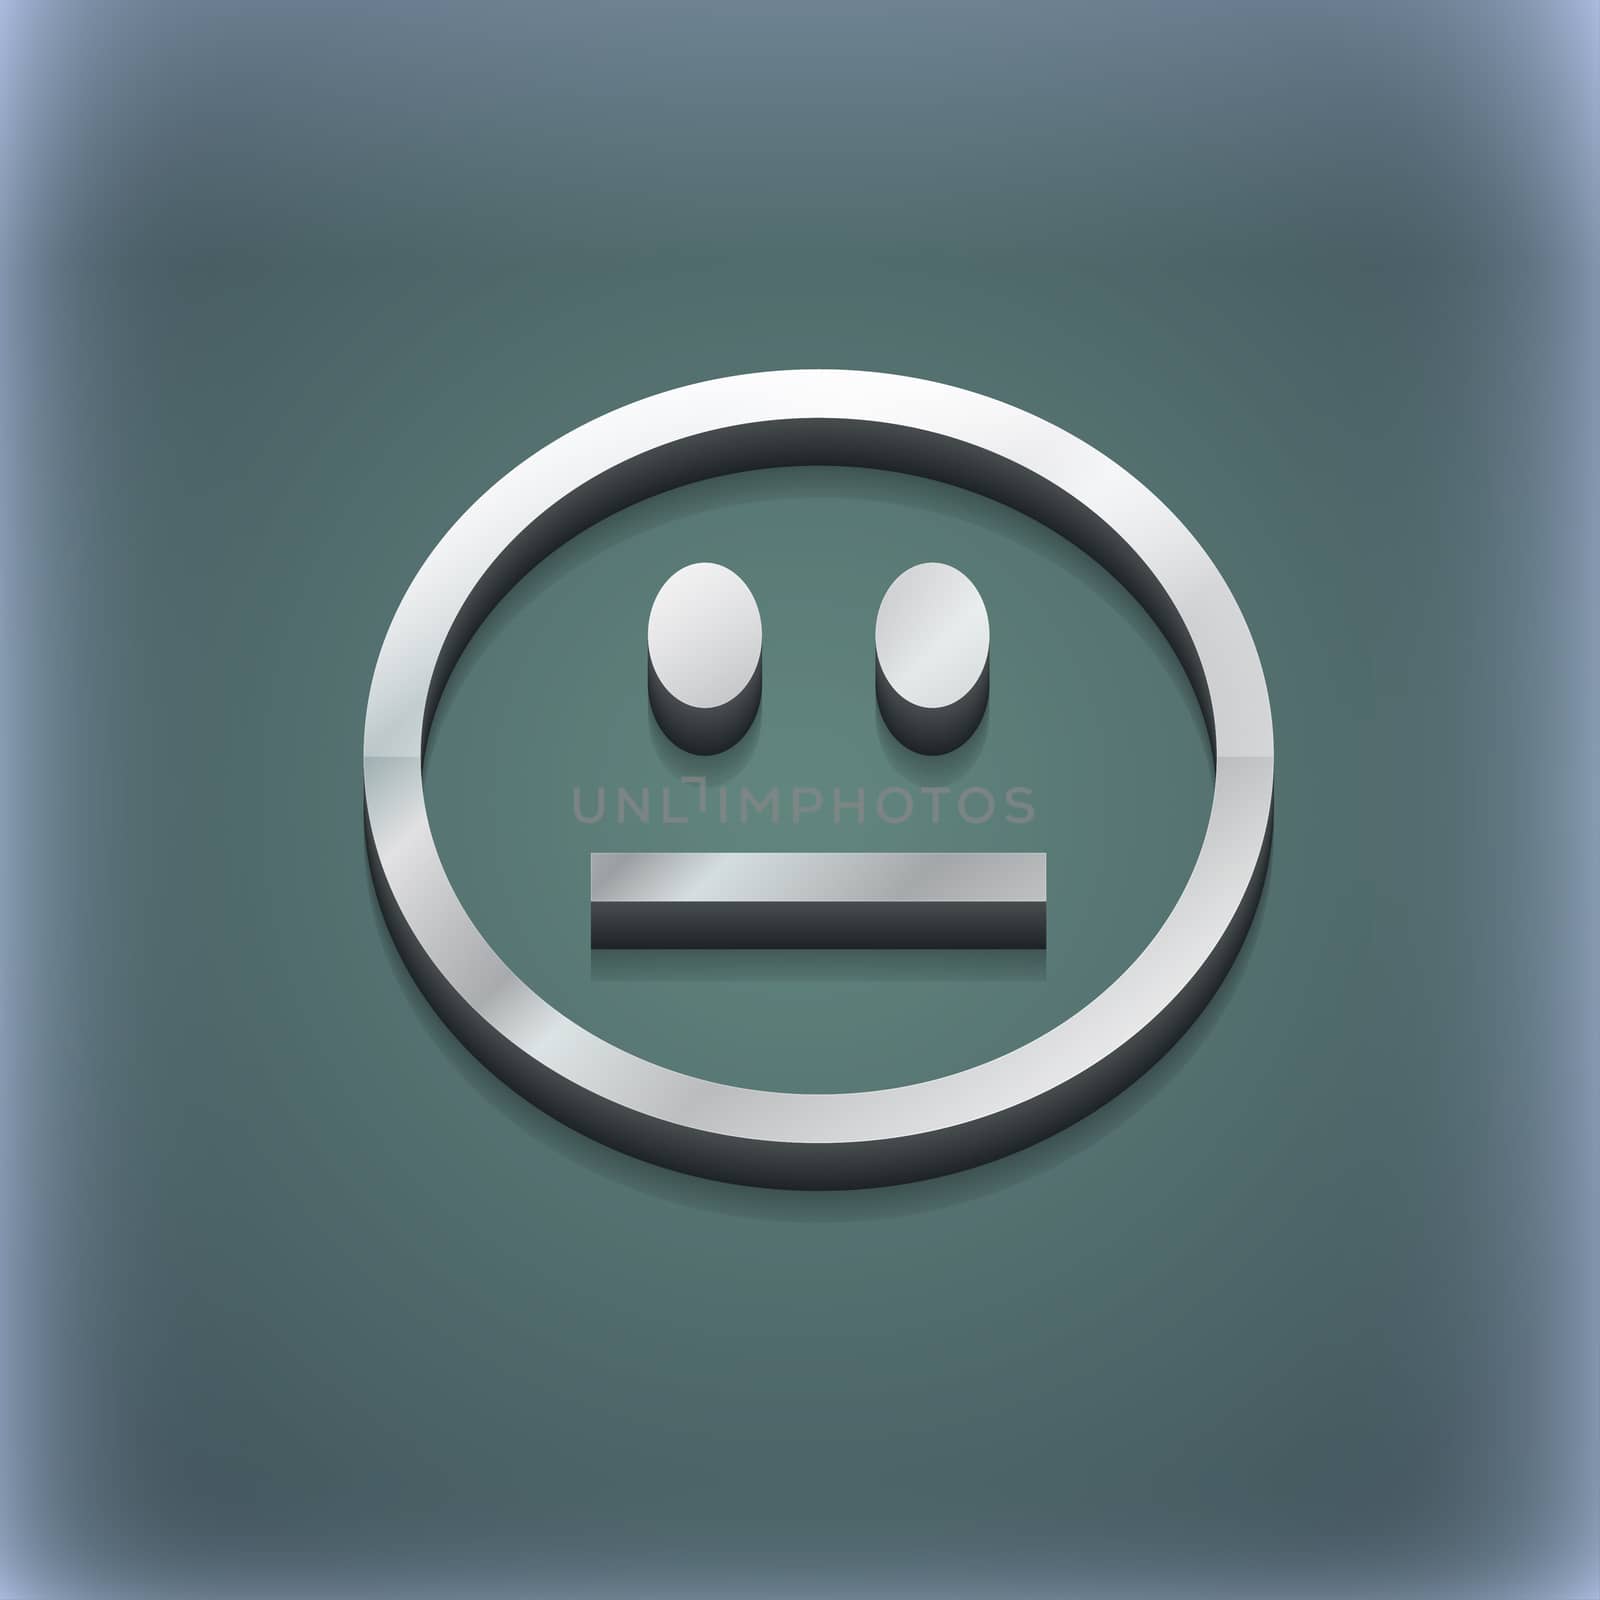 Sad face, Sadness depression icon symbol. 3D style. Trendy, modern design with space for your text illustration. Raster version